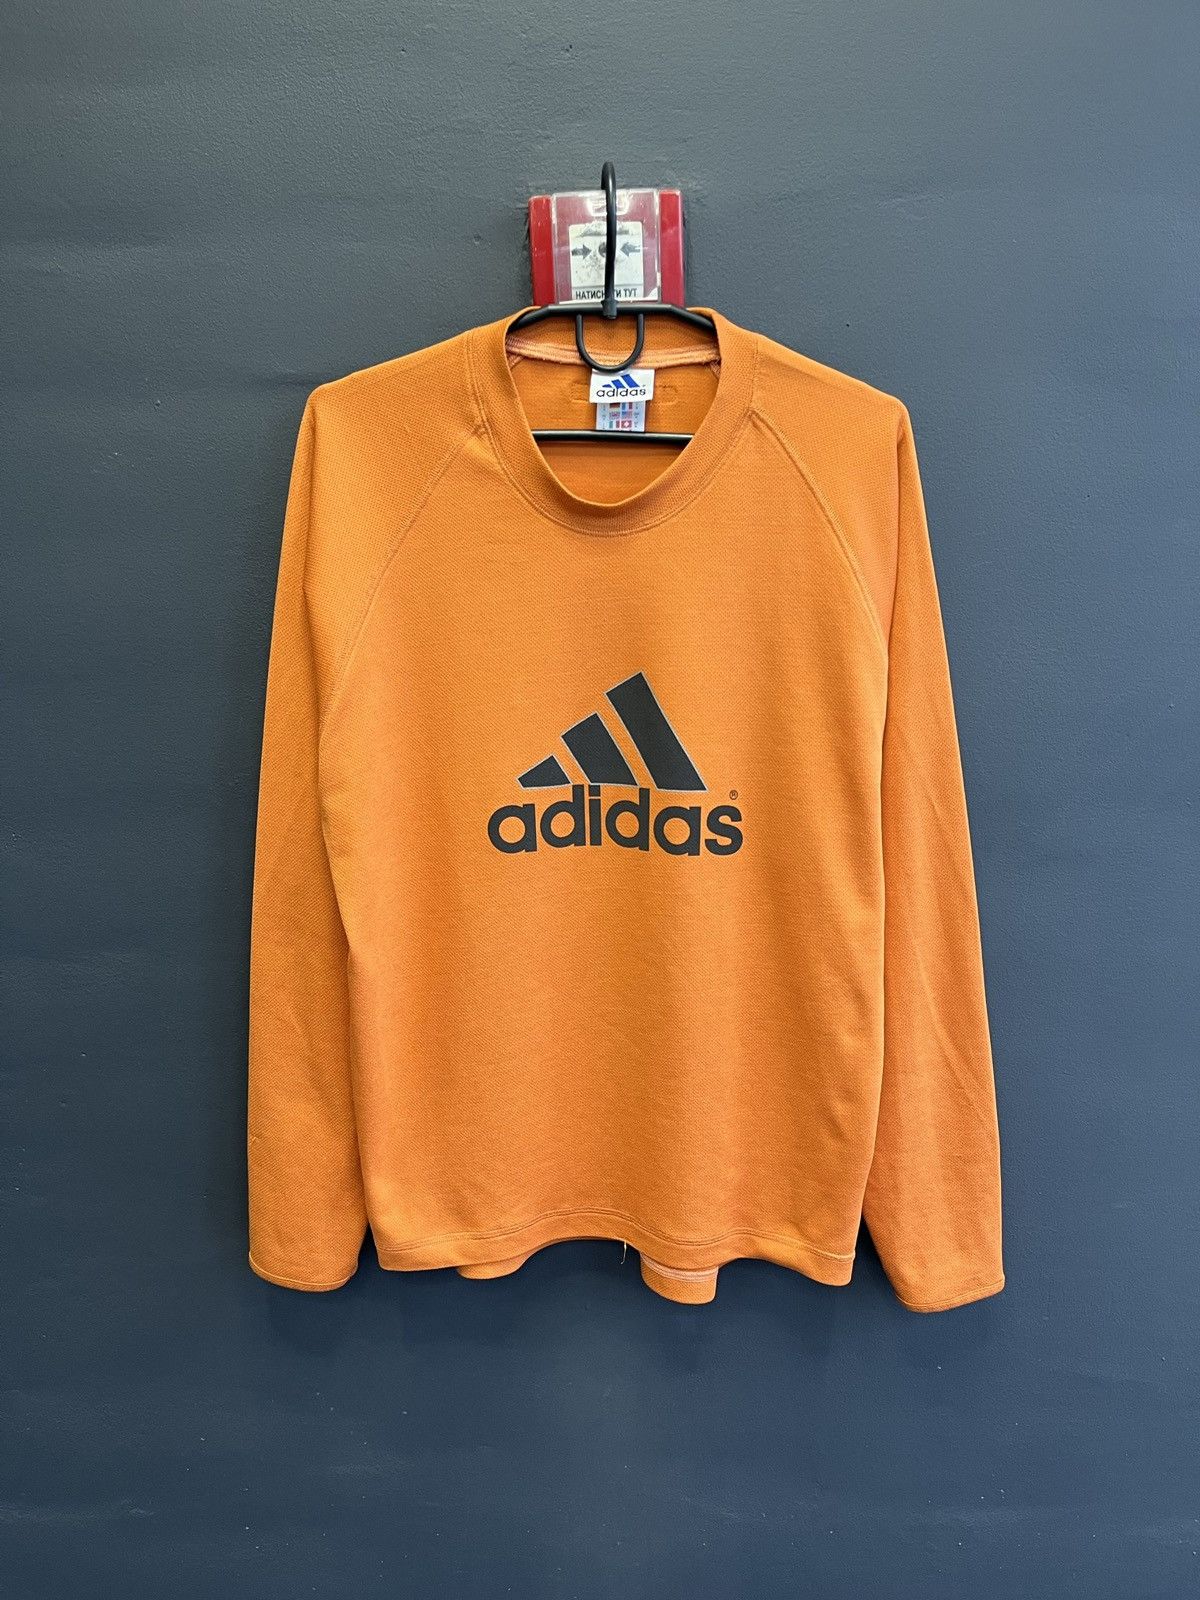 Pre-owned Adidas X Vintage Blokecore Adidas Equipment Long Sleeve Jersey In Orange